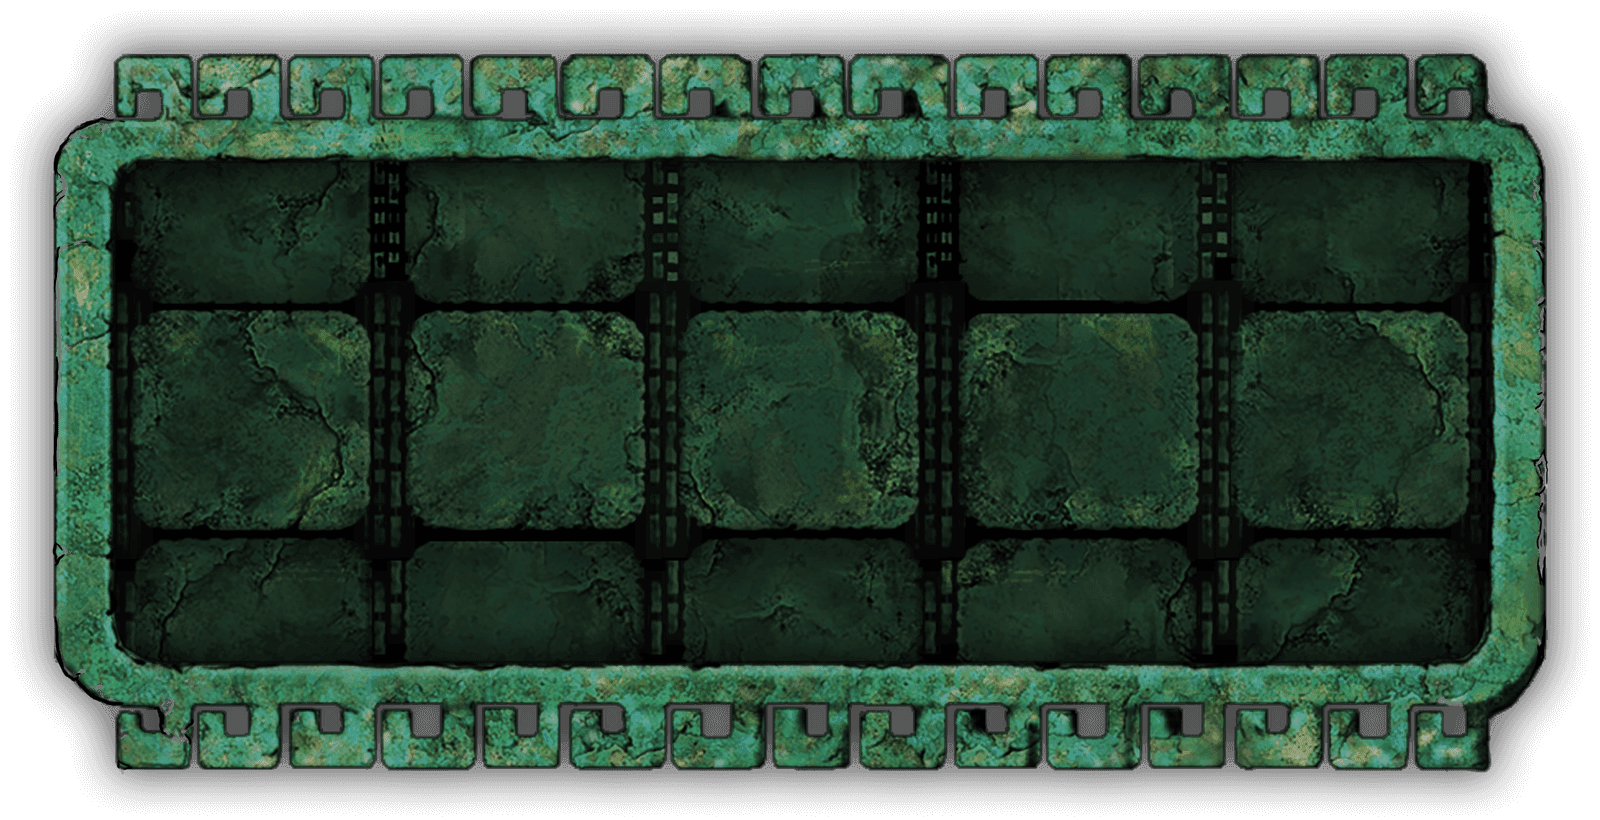 A puzzle frame made of jade